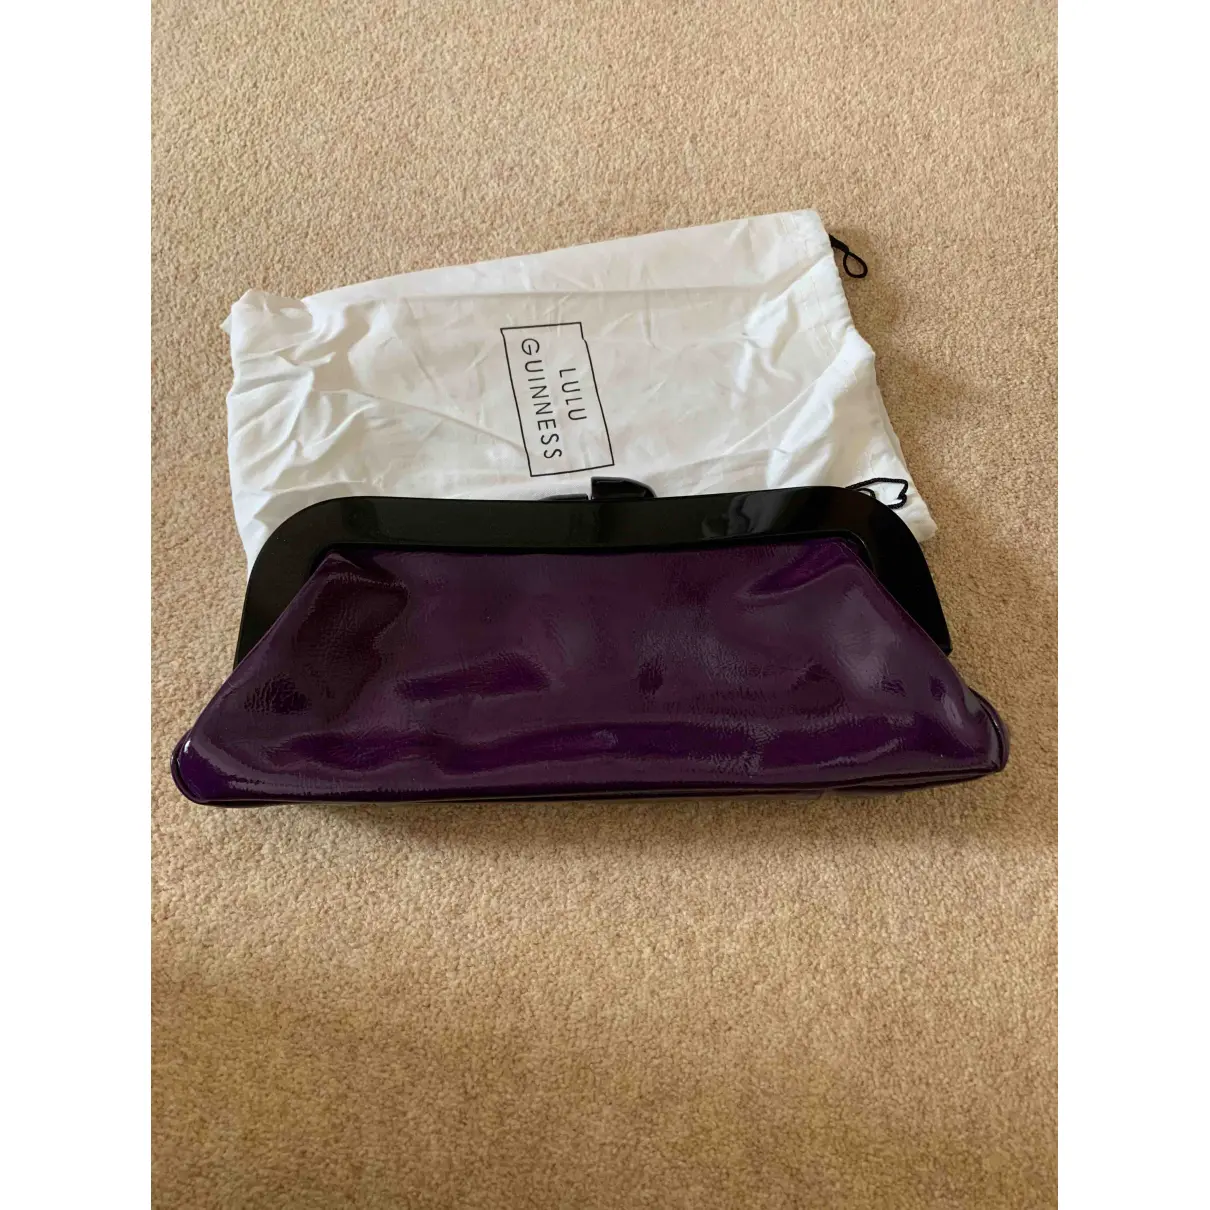 Buy Lulu Guinness Patent leather clutch bag online